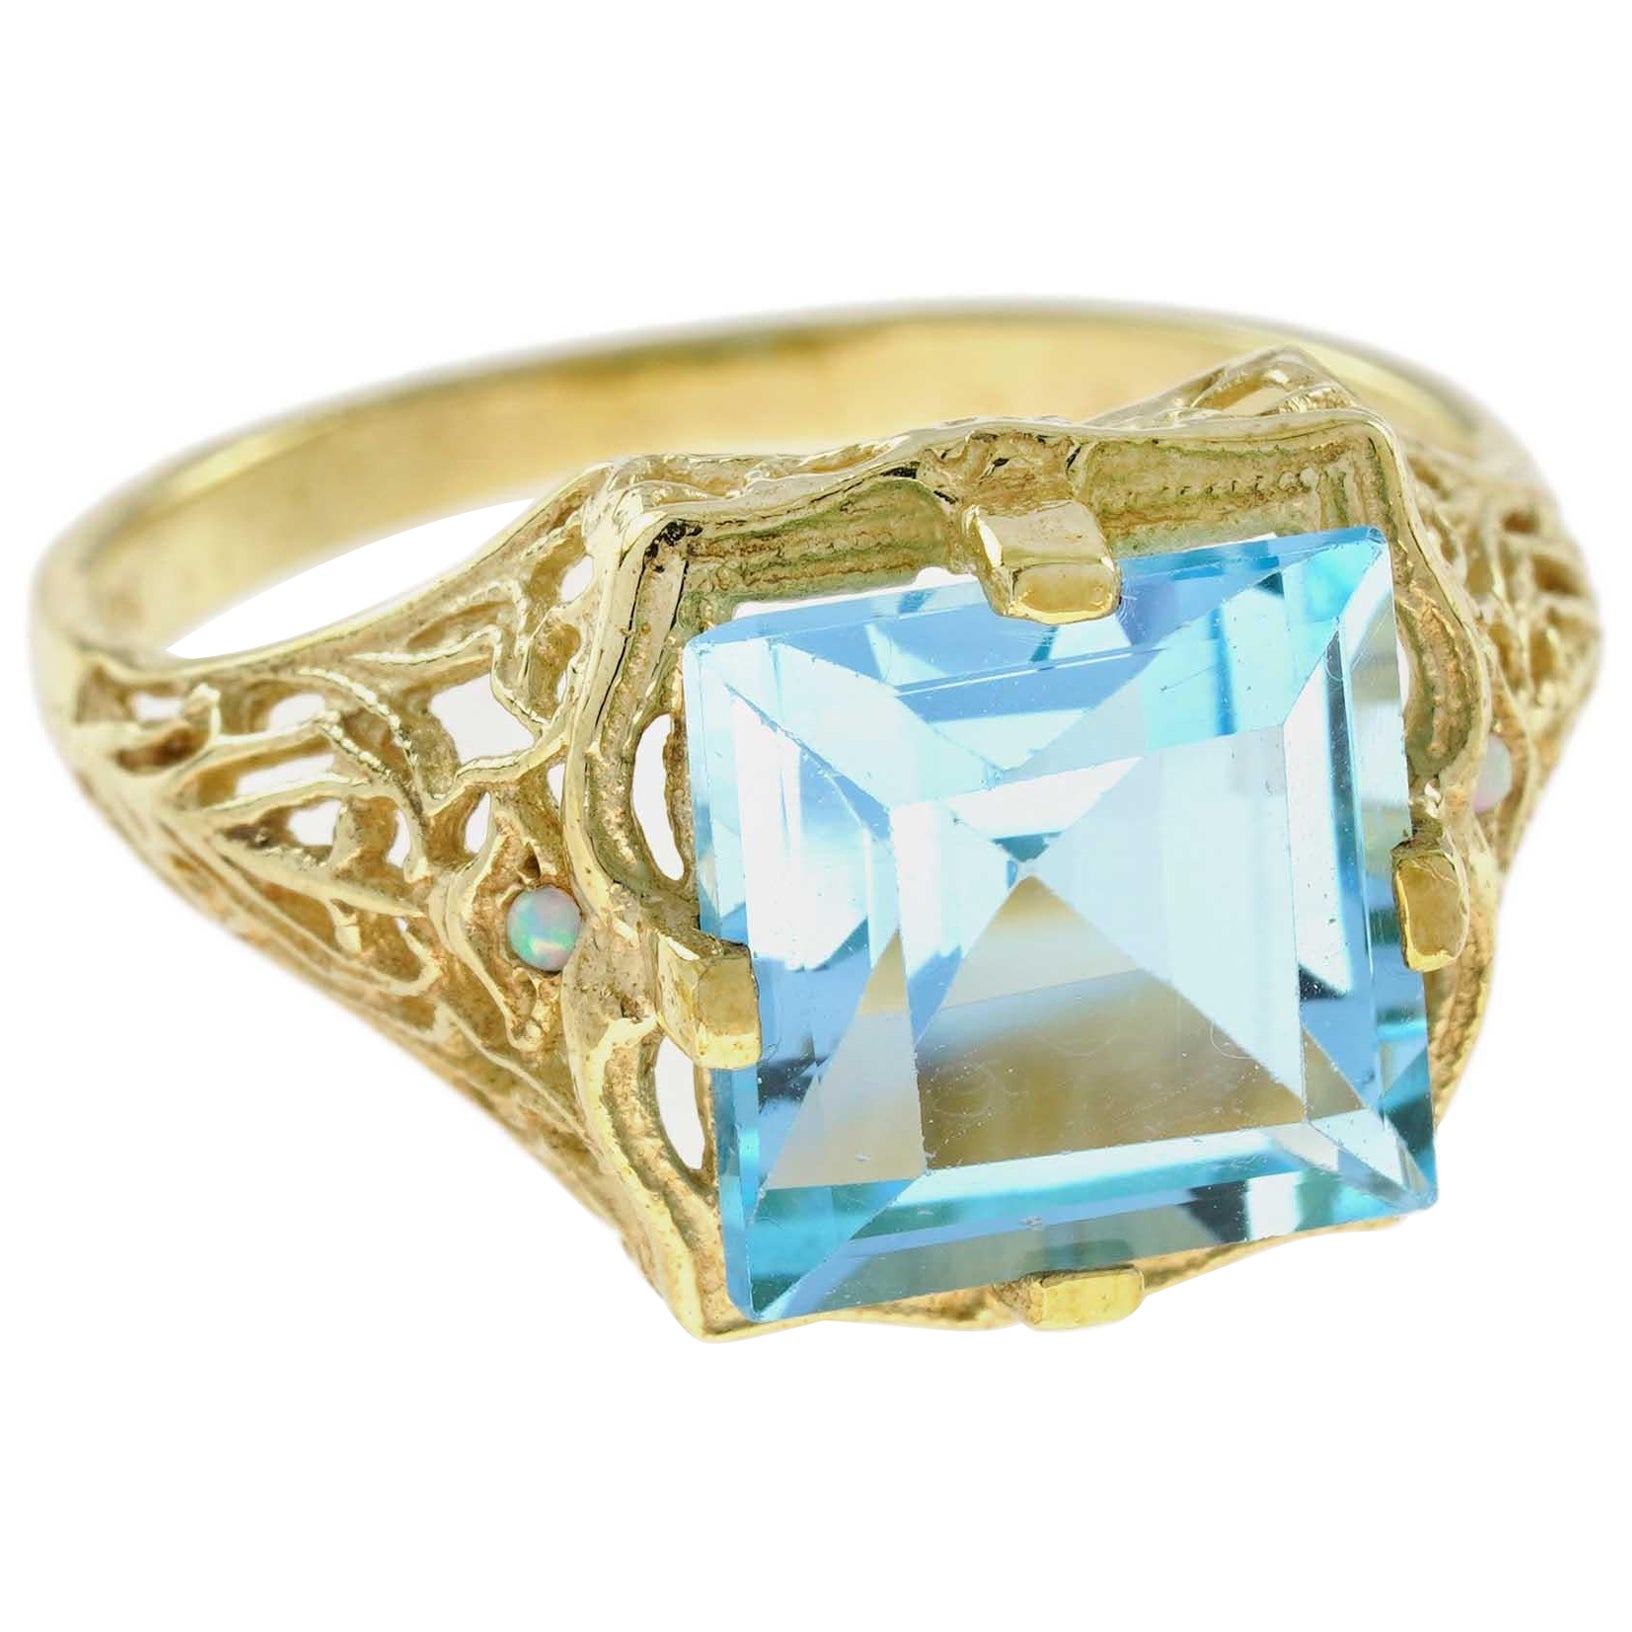 For Sale:  Natural Square Blue Topaz and Opal Vintage Style Filigree Ring in Solid 9K Gold